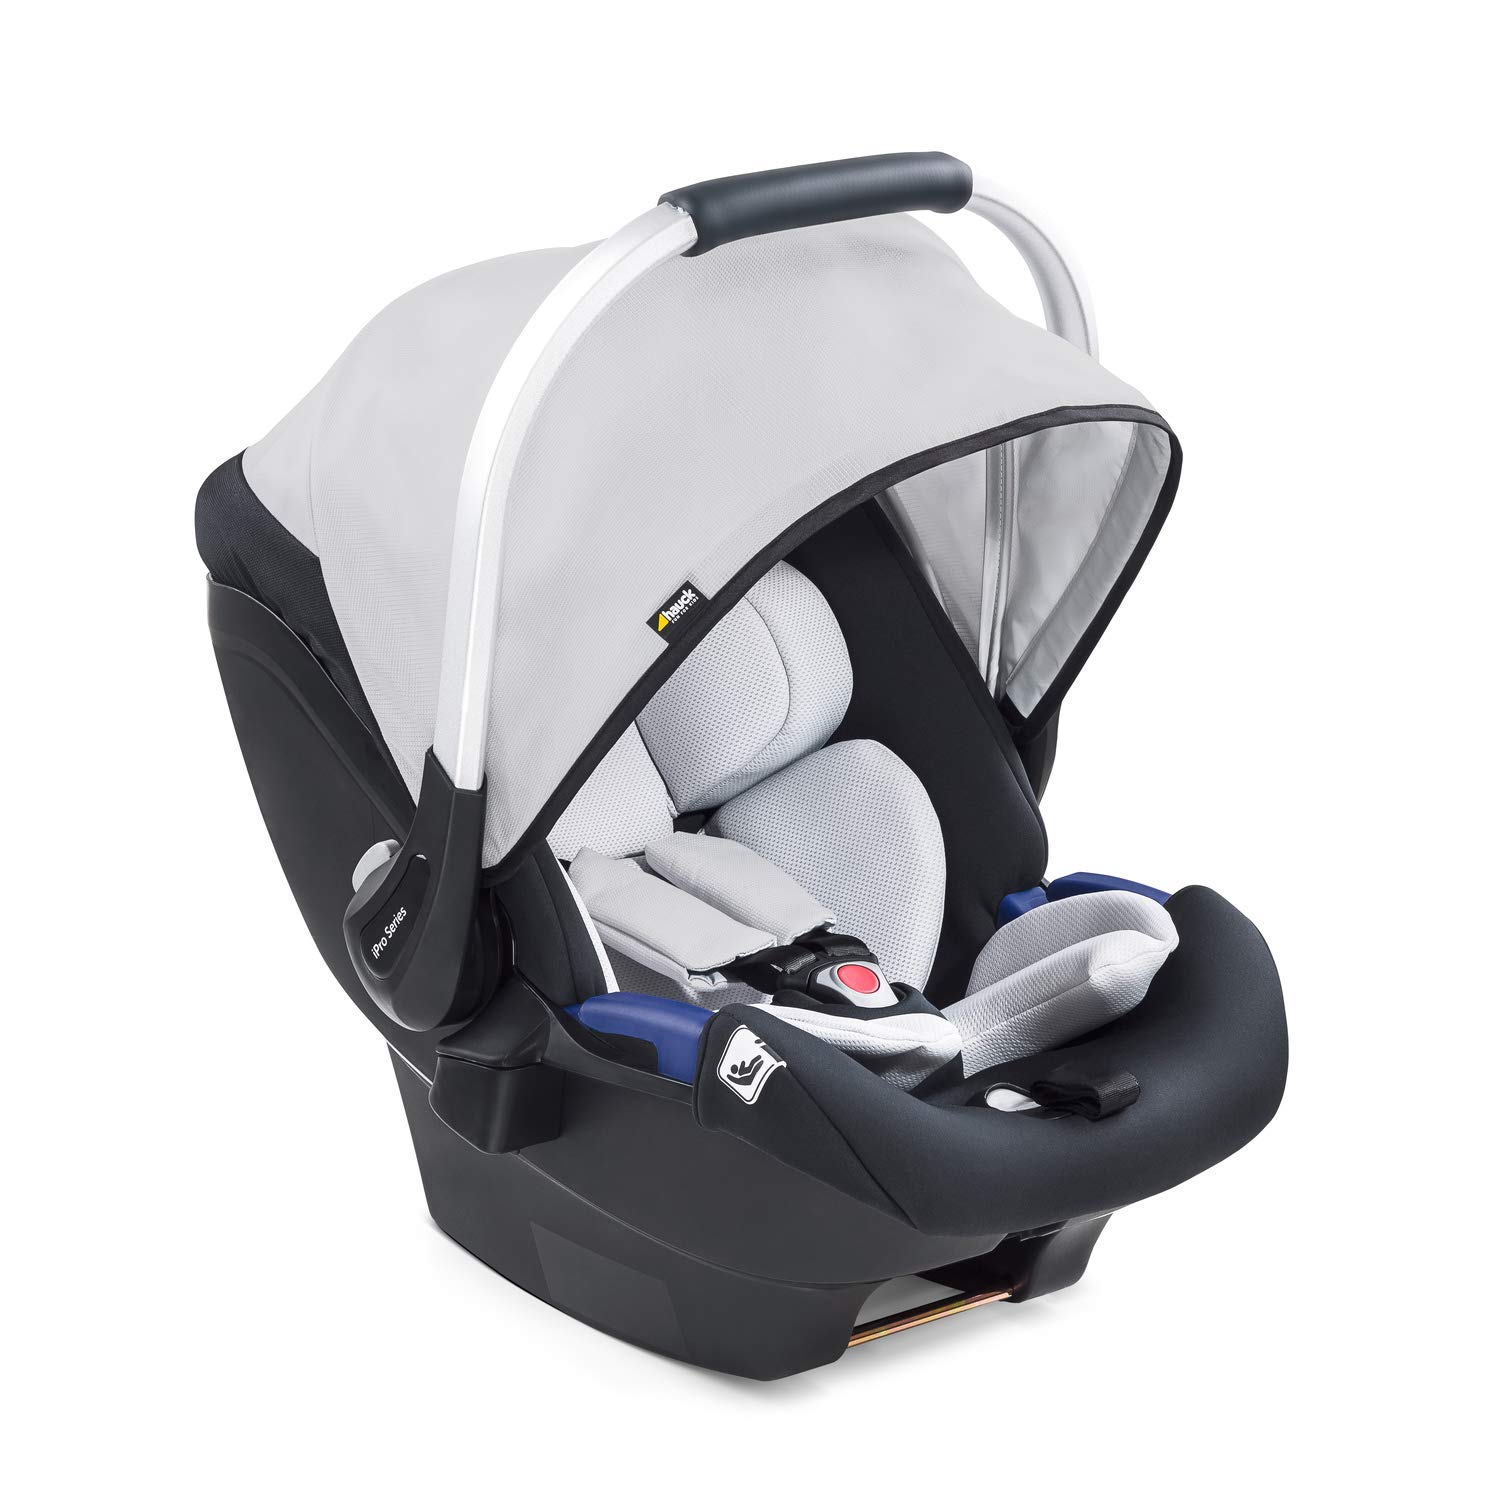 Hauck Ipro Baby Car Seat I-Size (From Birth To 18 Months) Including Seat In